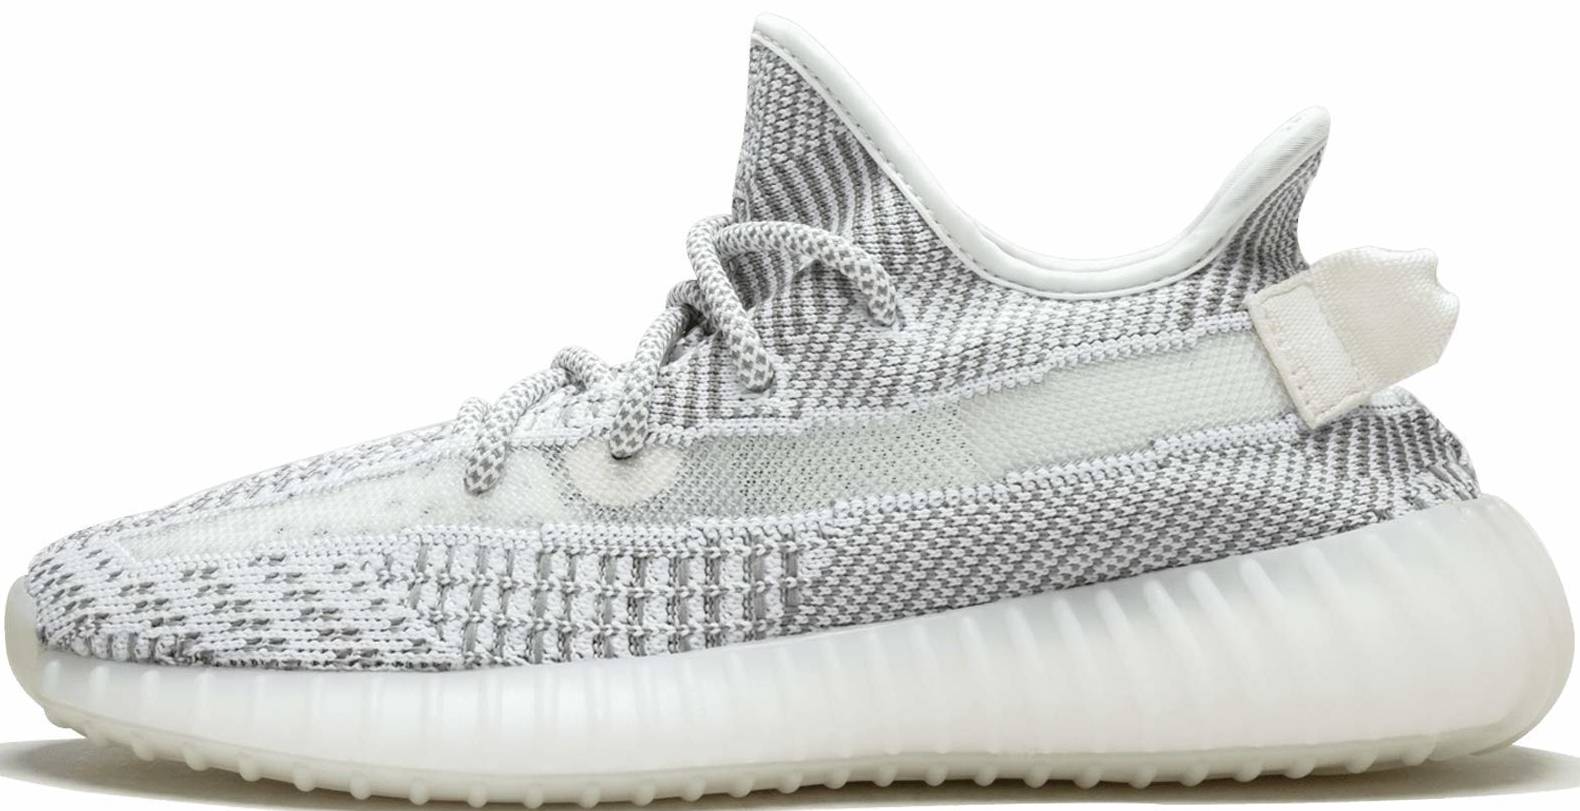 cheapest yeezy 350 colorway